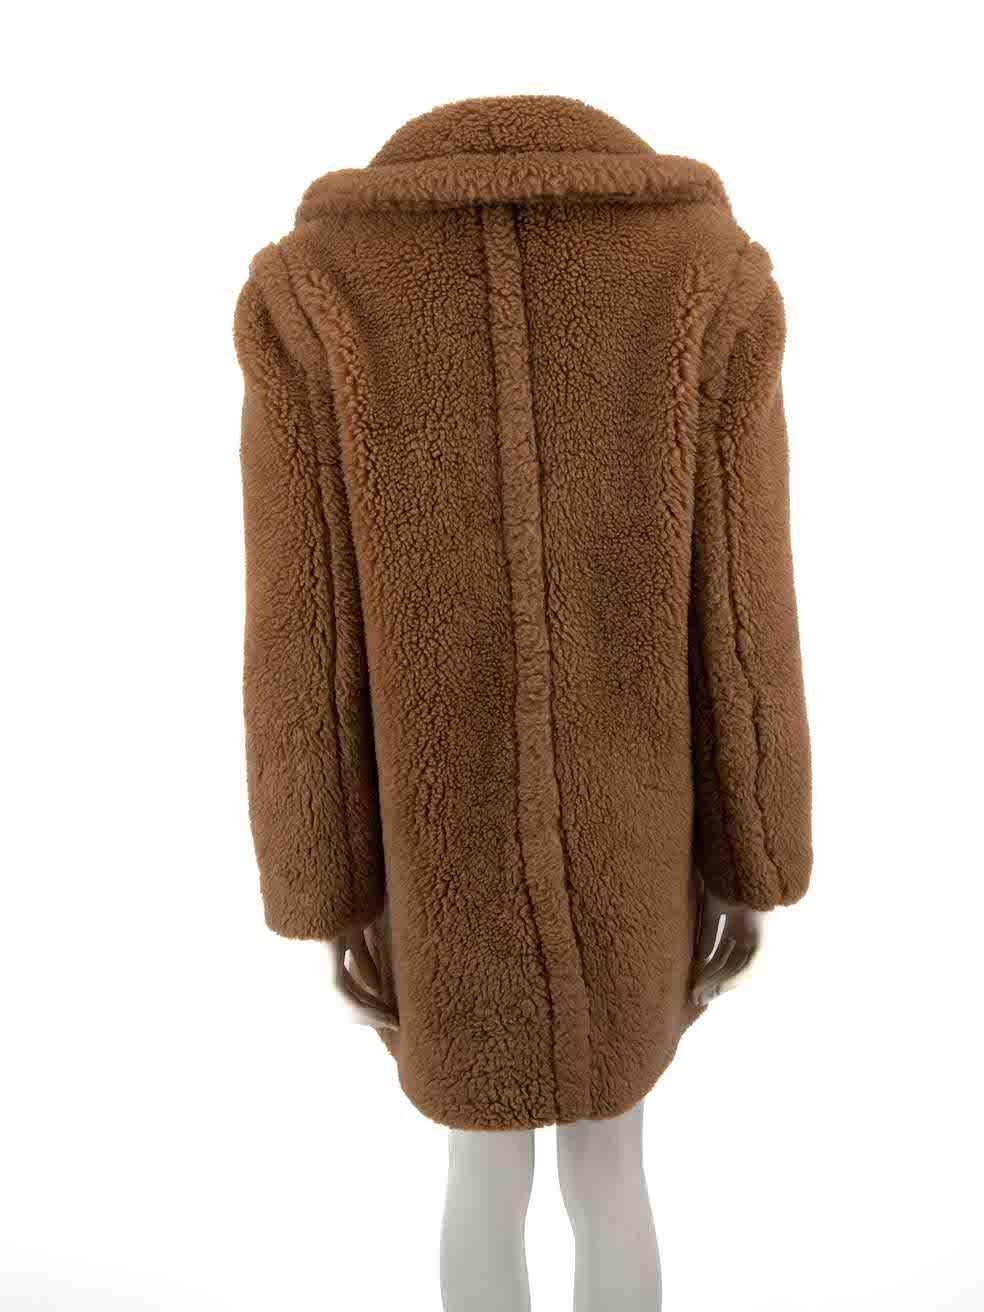 Max Mara Brown Camel Wool Silk Lined Teddy Coat Size S In Good Condition For Sale In London, GB